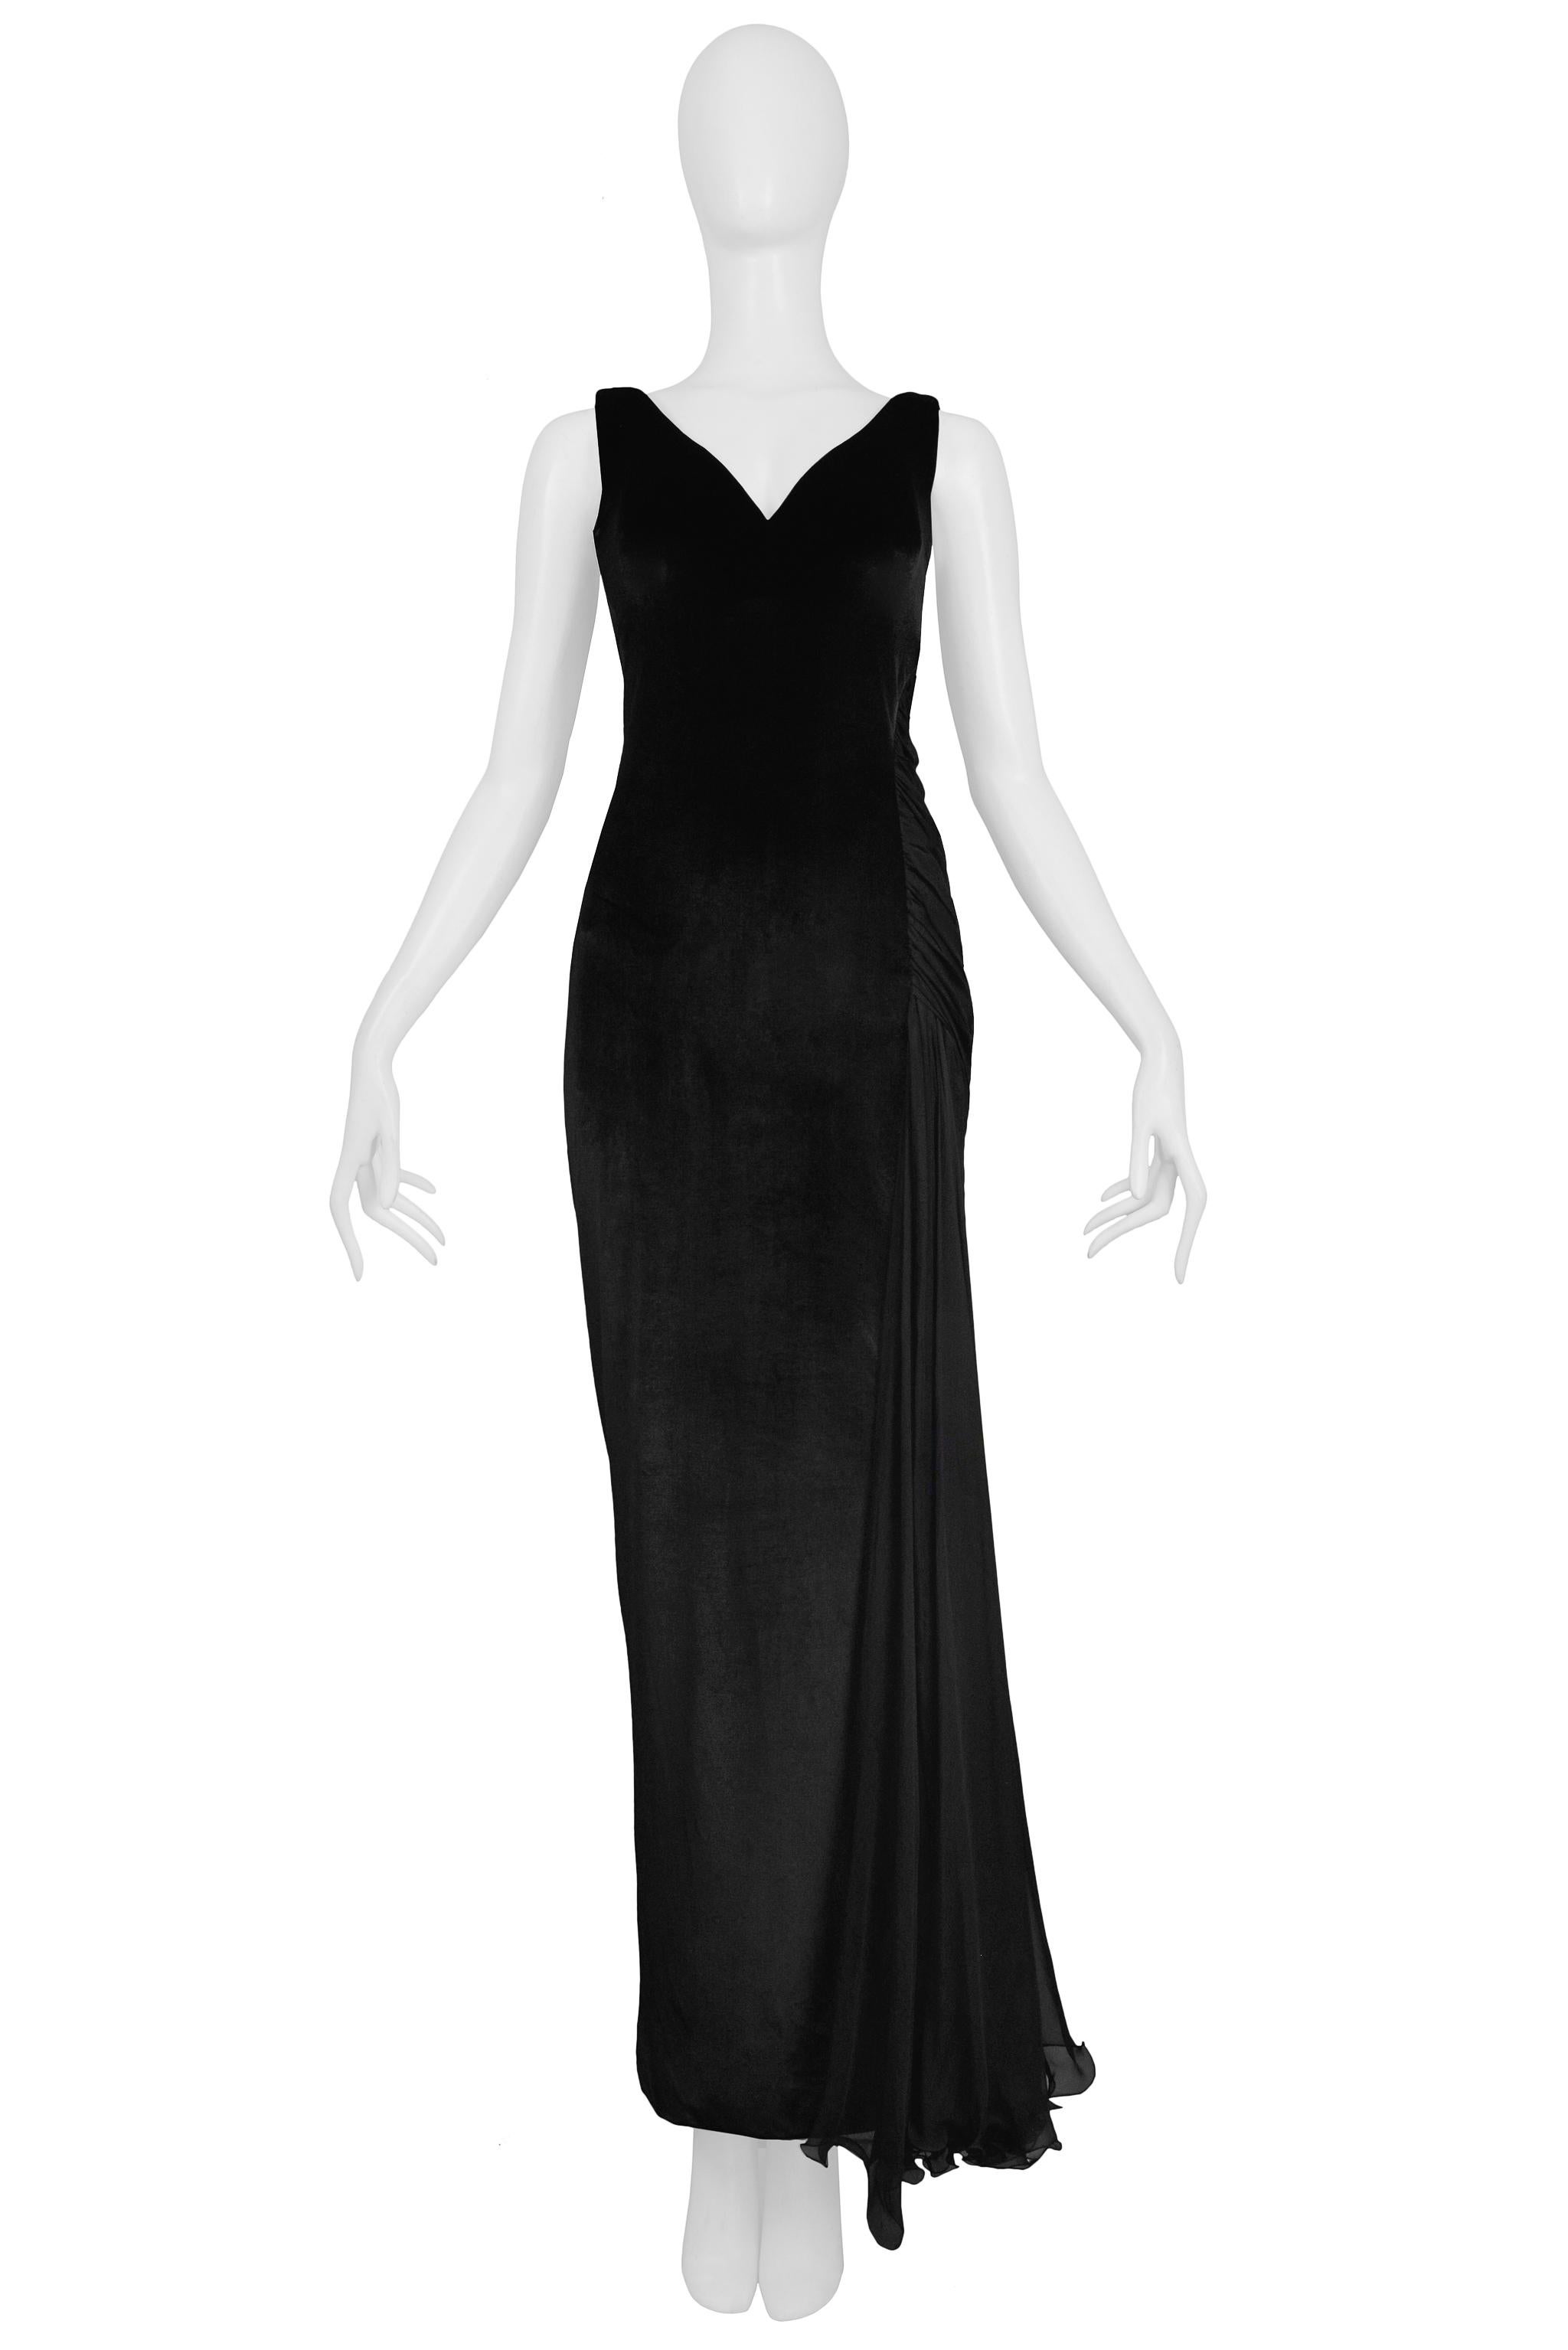 Resurrection Vintage is excited to offer a vintage Versace black velvet evening gown featuring a draped chiffon inset, deep v-neck, and sculpted back panel. 

Versace 
Size S or 38
Measurements: Approx Bust: 32